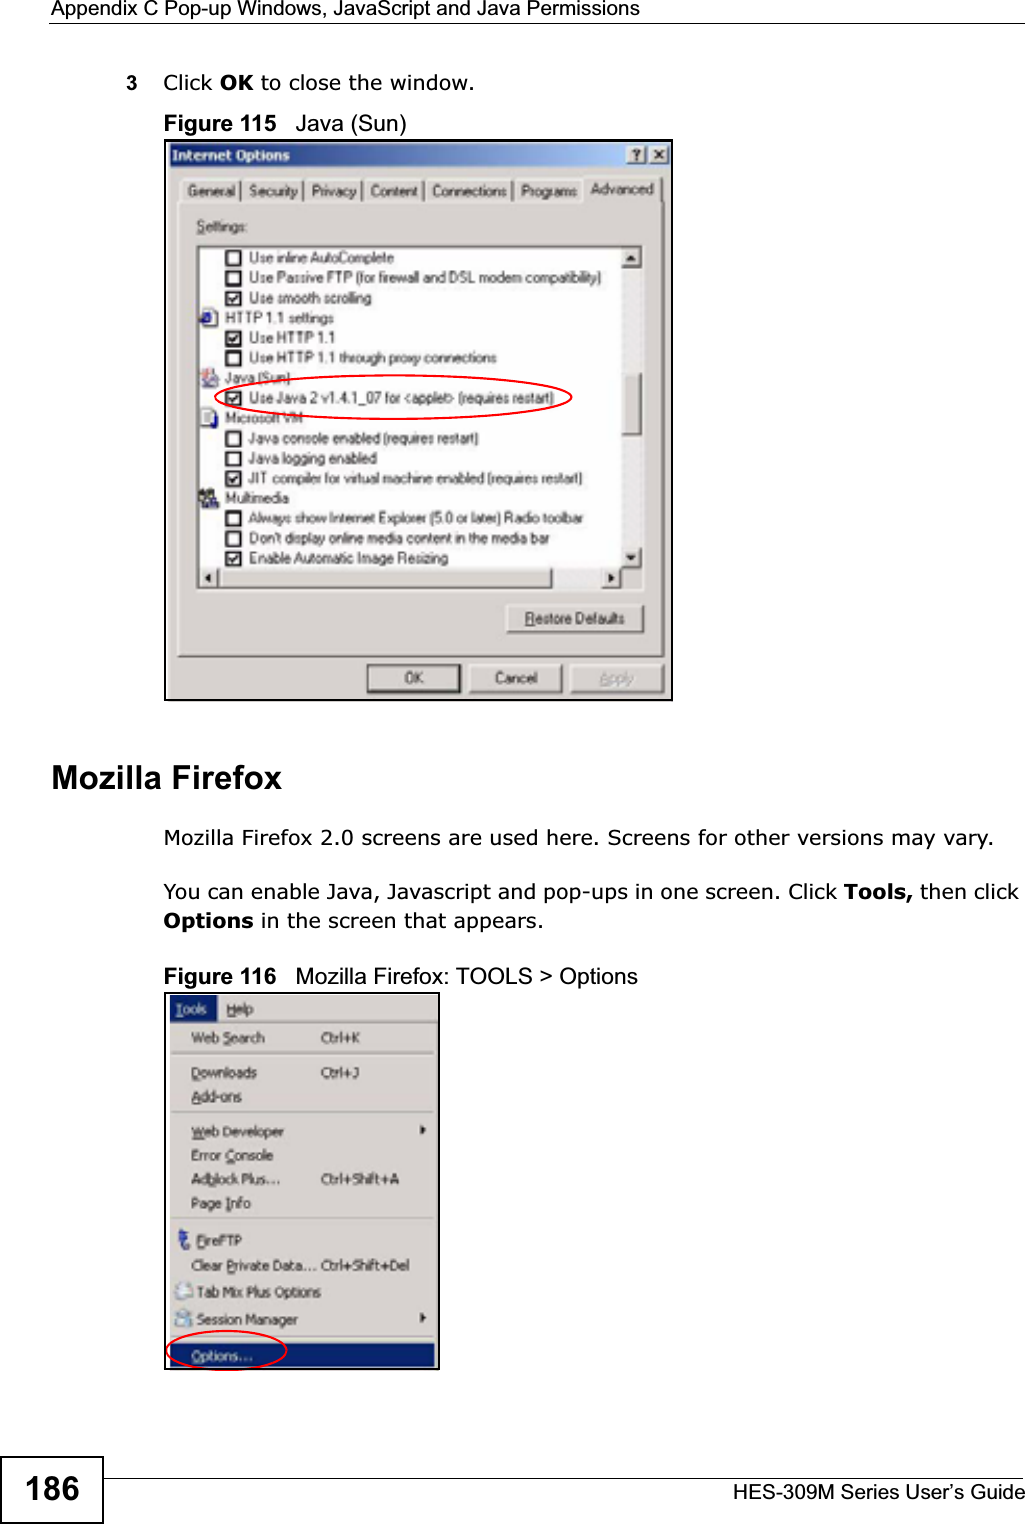 Appendix C Pop-up Windows, JavaScript and Java PermissionsHES-309M Series User’s Guide1863Click OK to close the window.Figure 115   Java (Sun)Mozilla FirefoxMozilla Firefox 2.0 screens are used here. Screens for other versions may vary. You can enable Java, Javascript and pop-ups in one screen. Click Tools, then click Options in the screen that appears.Figure 116   Mozilla Firefox: TOOLS &gt; Options